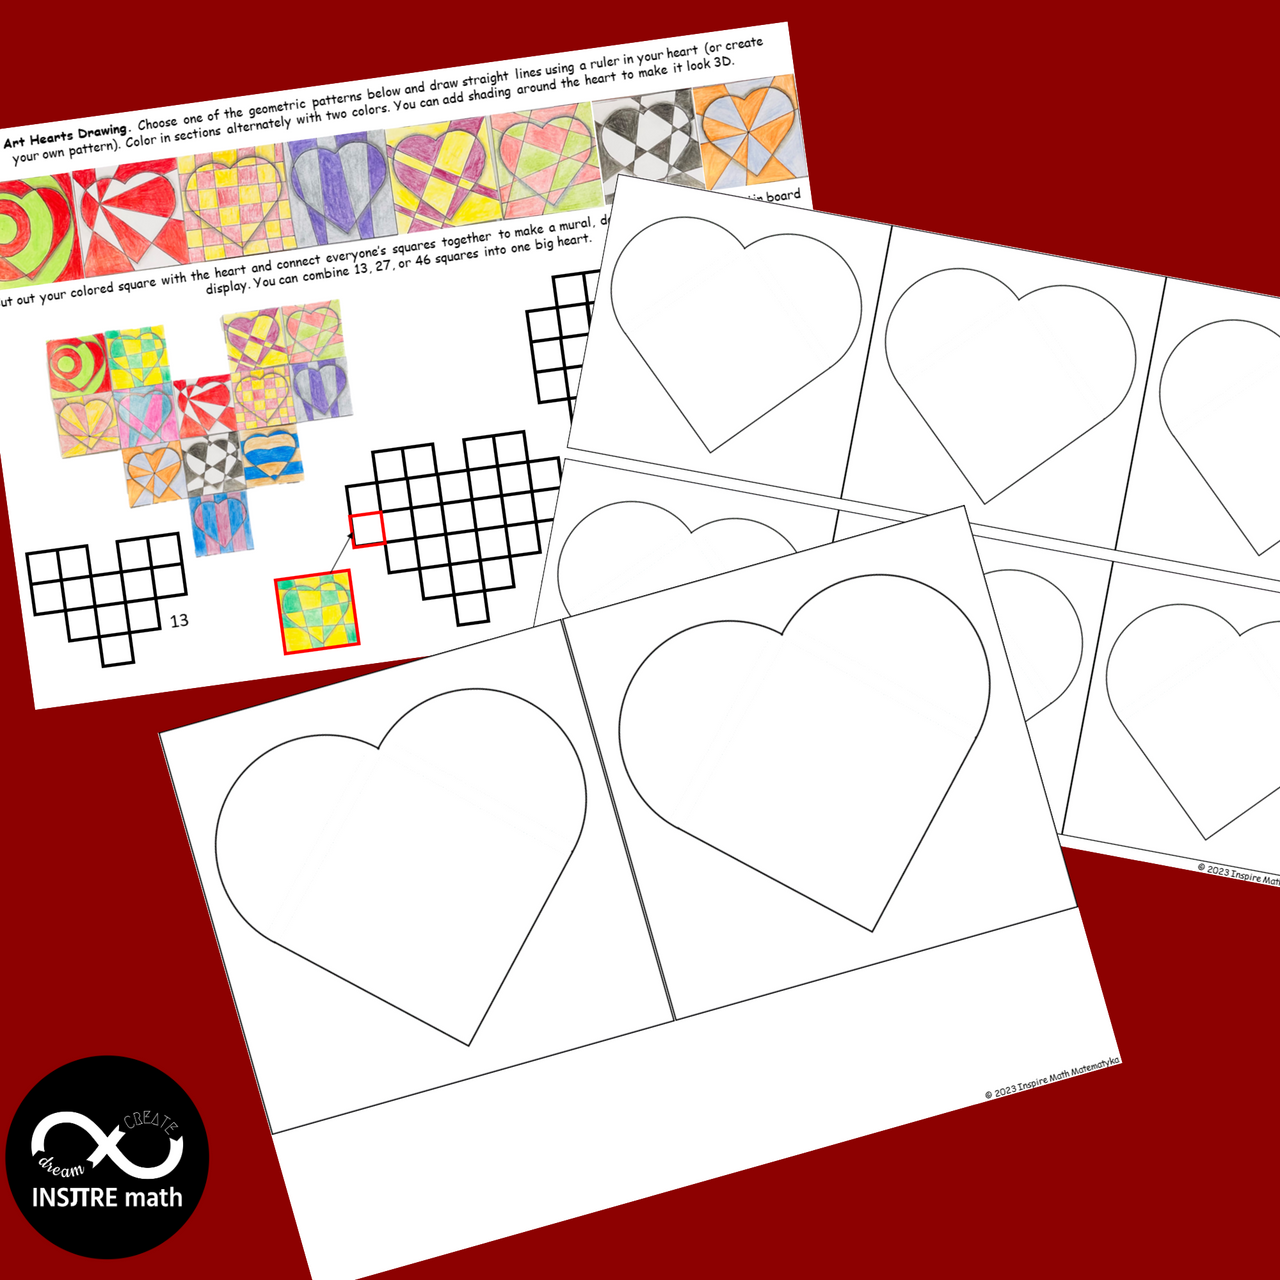 FREE Collaborative Valentine's Day Math and Art Project: Op Art Hearts Drawing